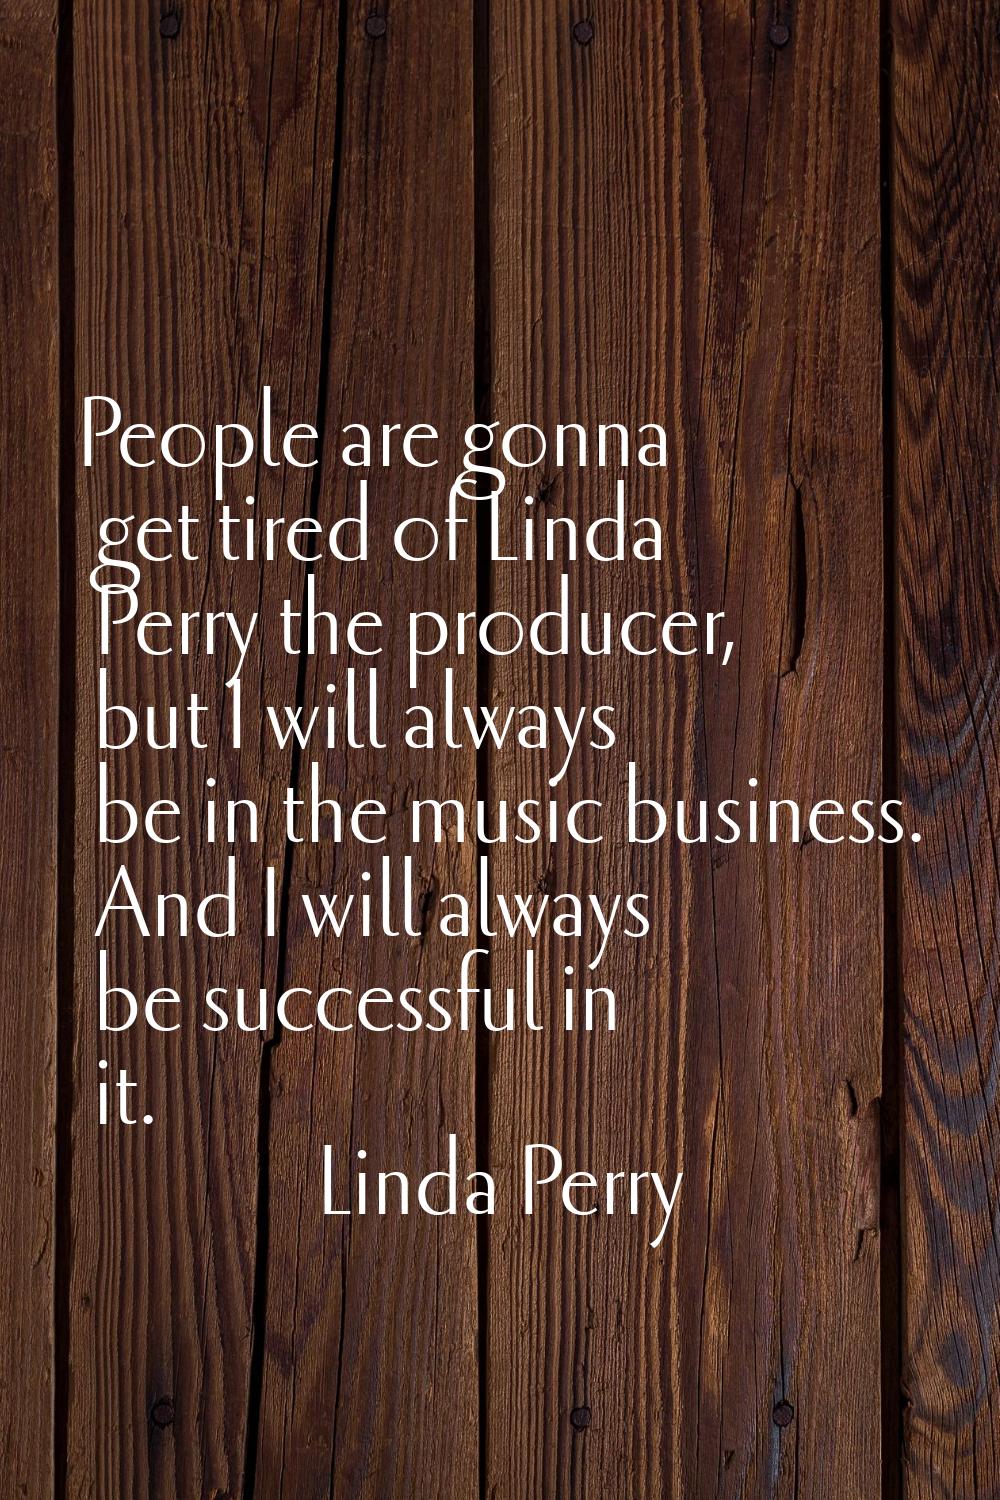 People are gonna get tired of Linda Perry the producer, but I will always be in the music business.